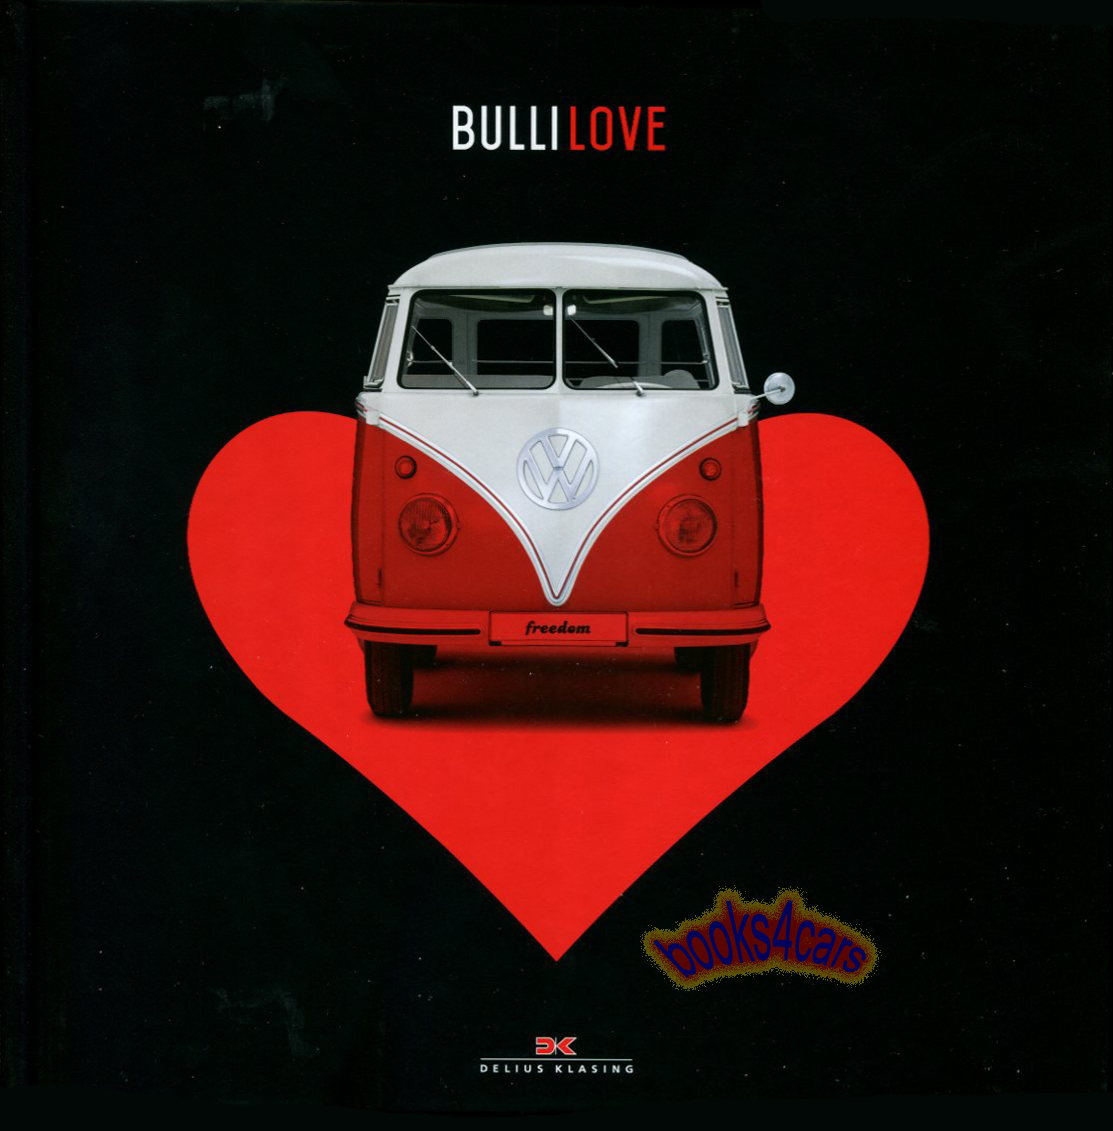 Bulli Love Volkswagen Bus history of passion hardbound 166 pg history BulliLove by E. Baaske of VW Transporter Van traces the development of the all the many variation